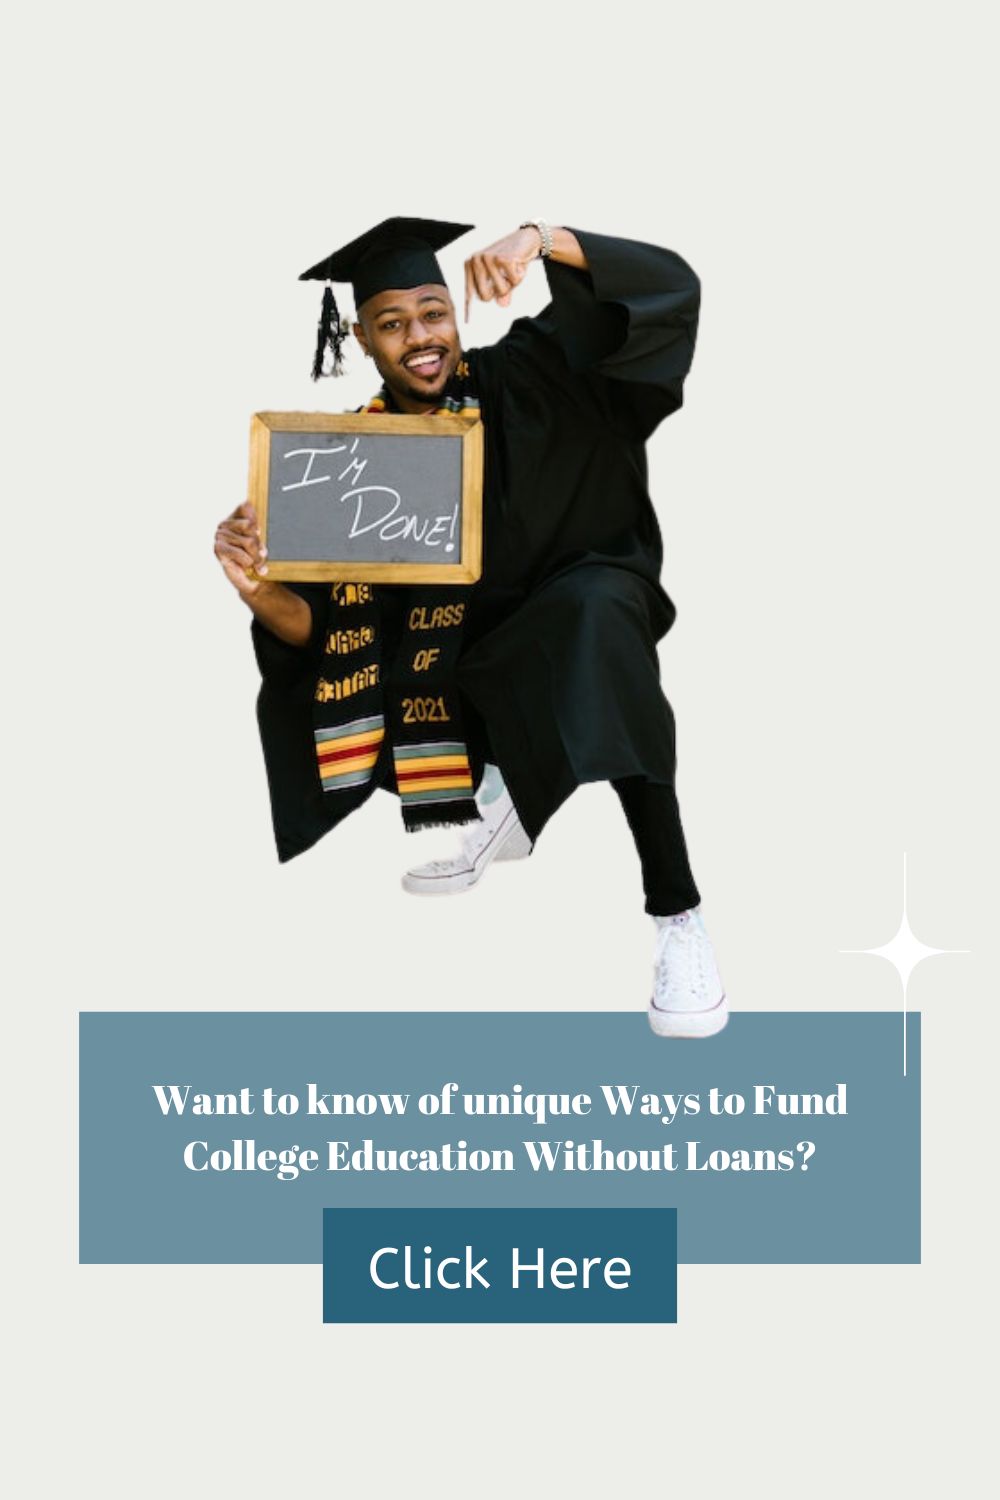 Want to know of unique Ways to Fund College Education Without Loans